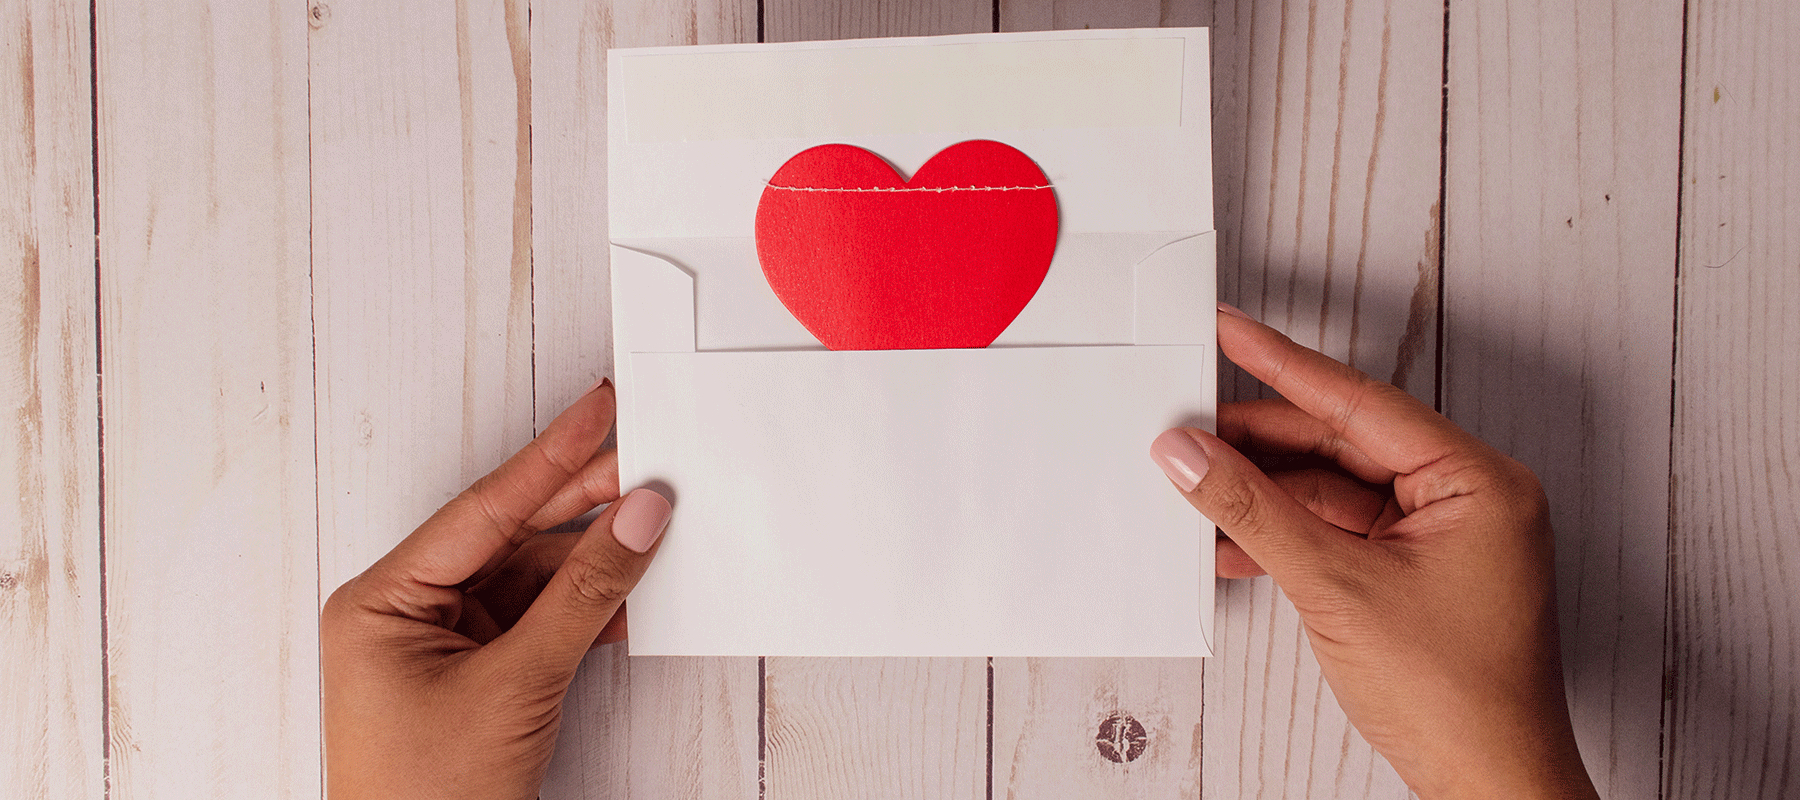 heroic-fundraising-featured-image_-hand-hearts-envelope